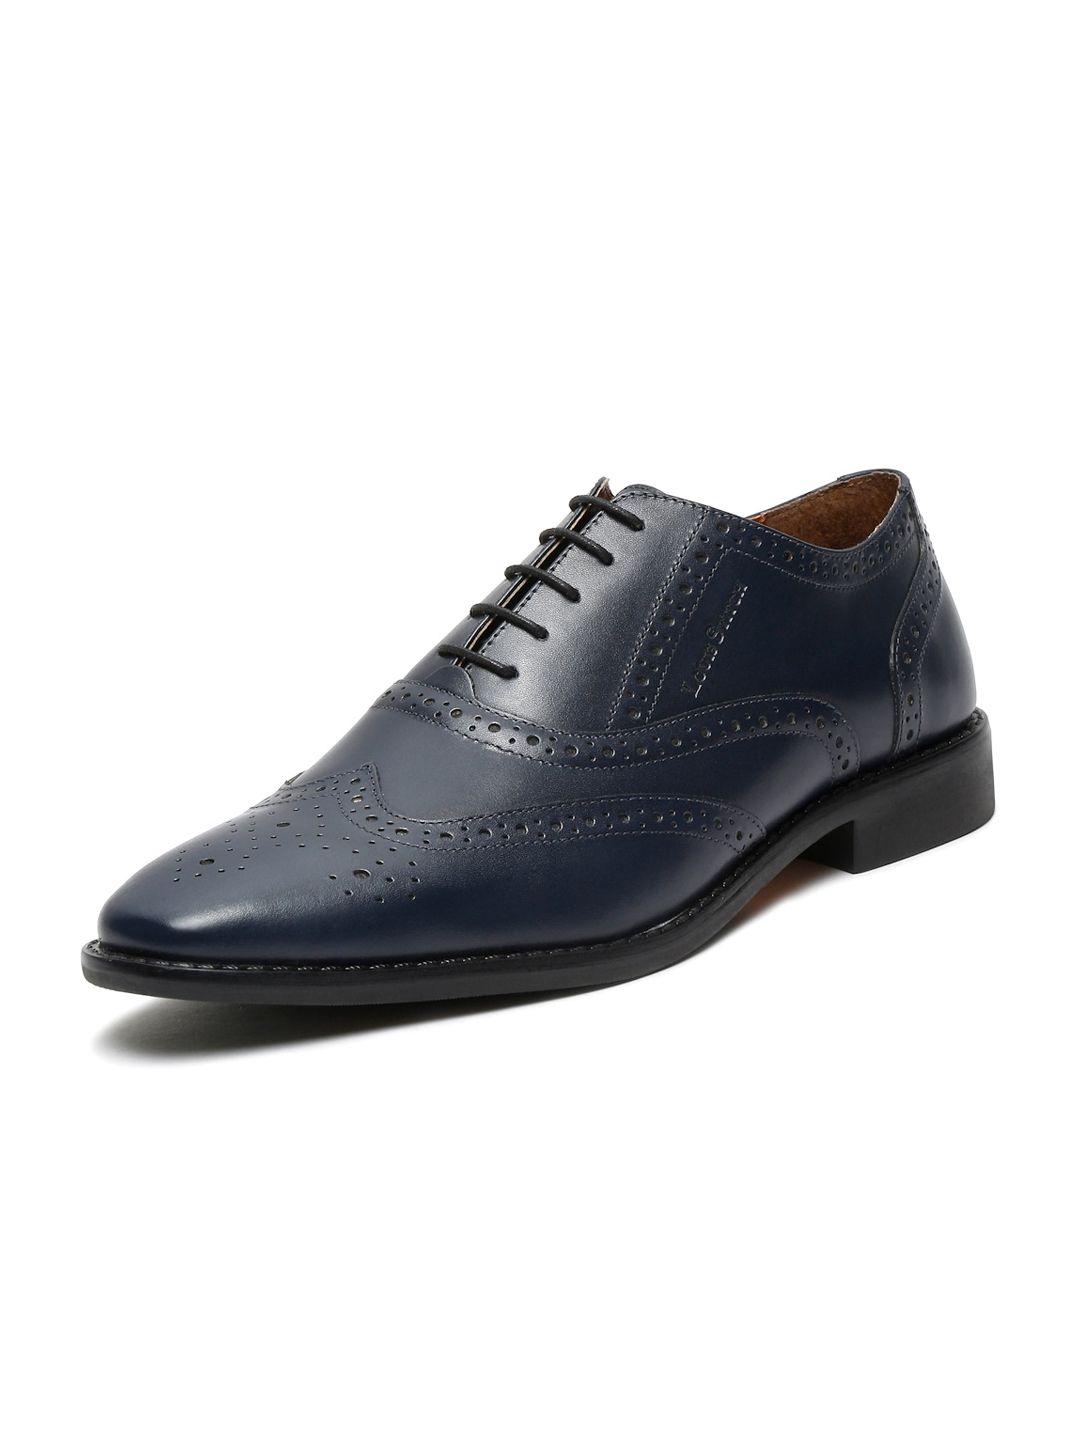 louis-stitch-men-textured-leather-formal-brogues